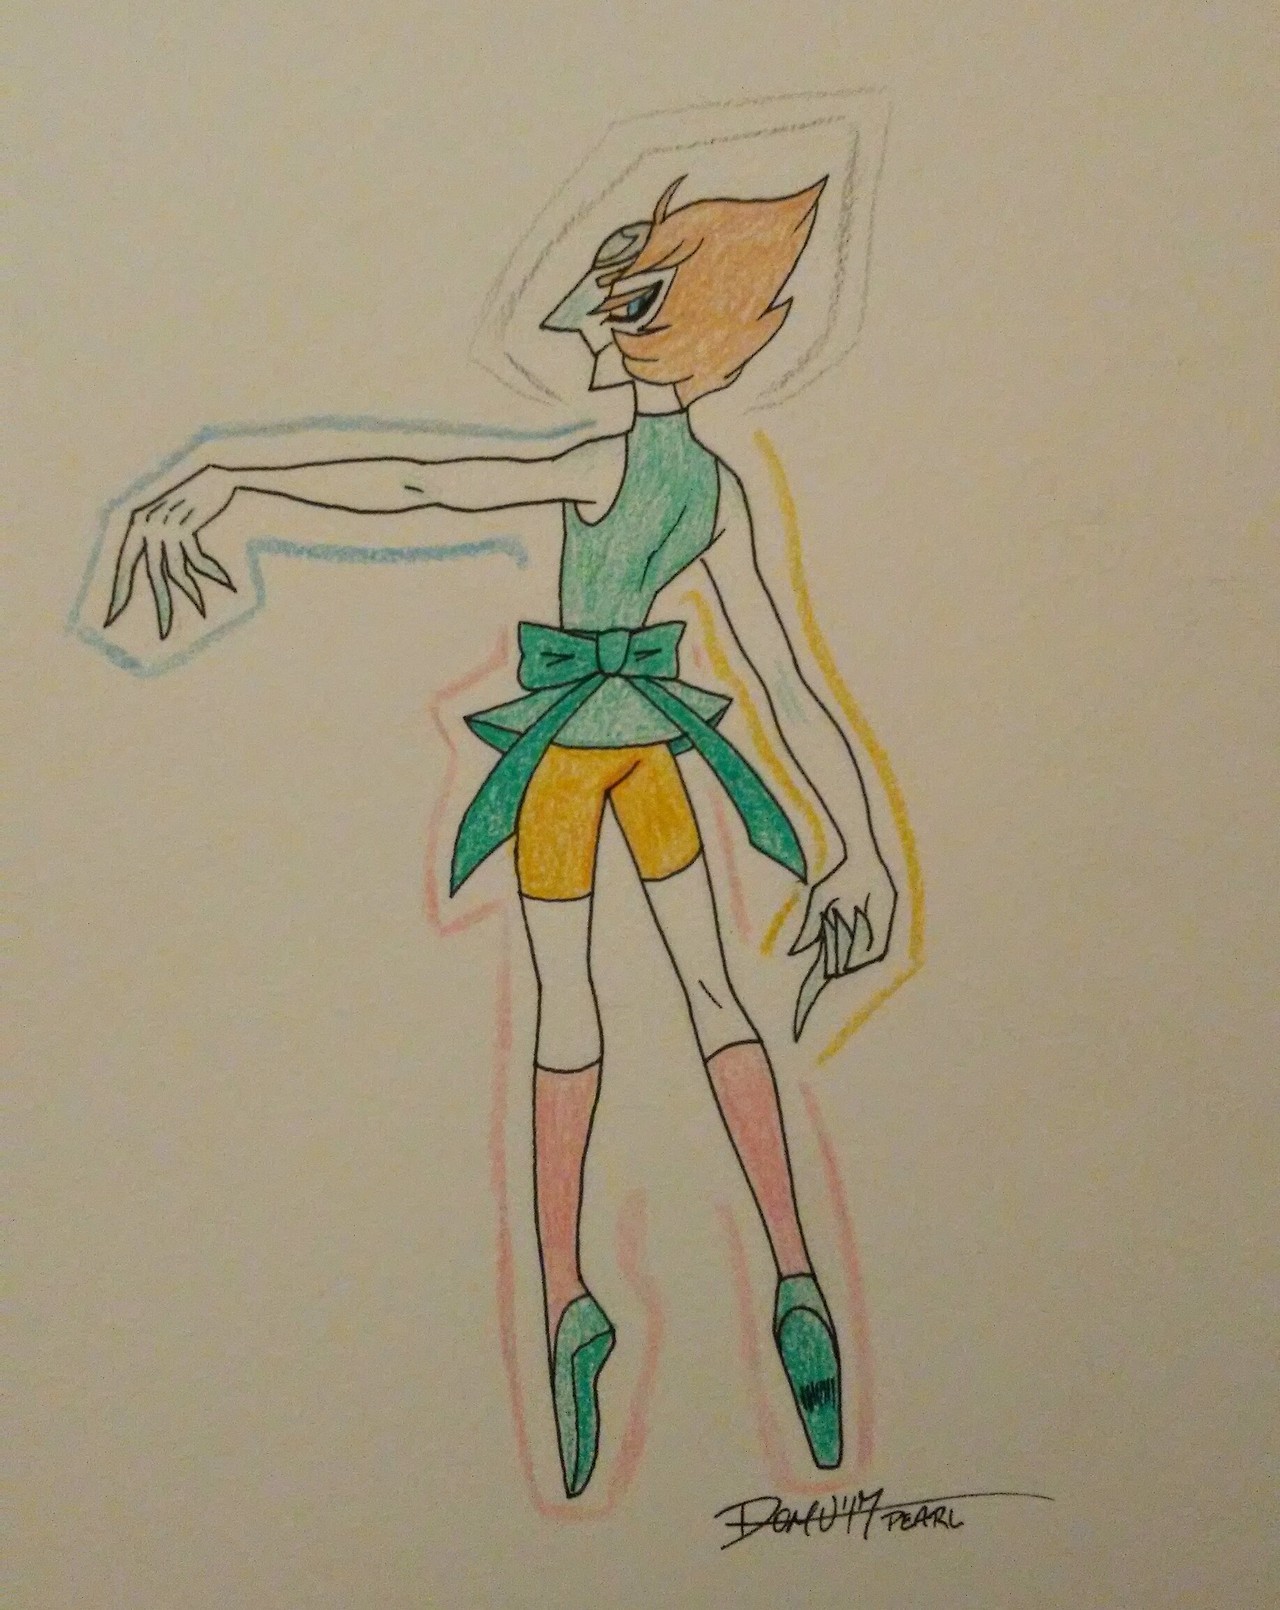 merry christmas, here’s a less human looking pearl. no refunds or exchanges